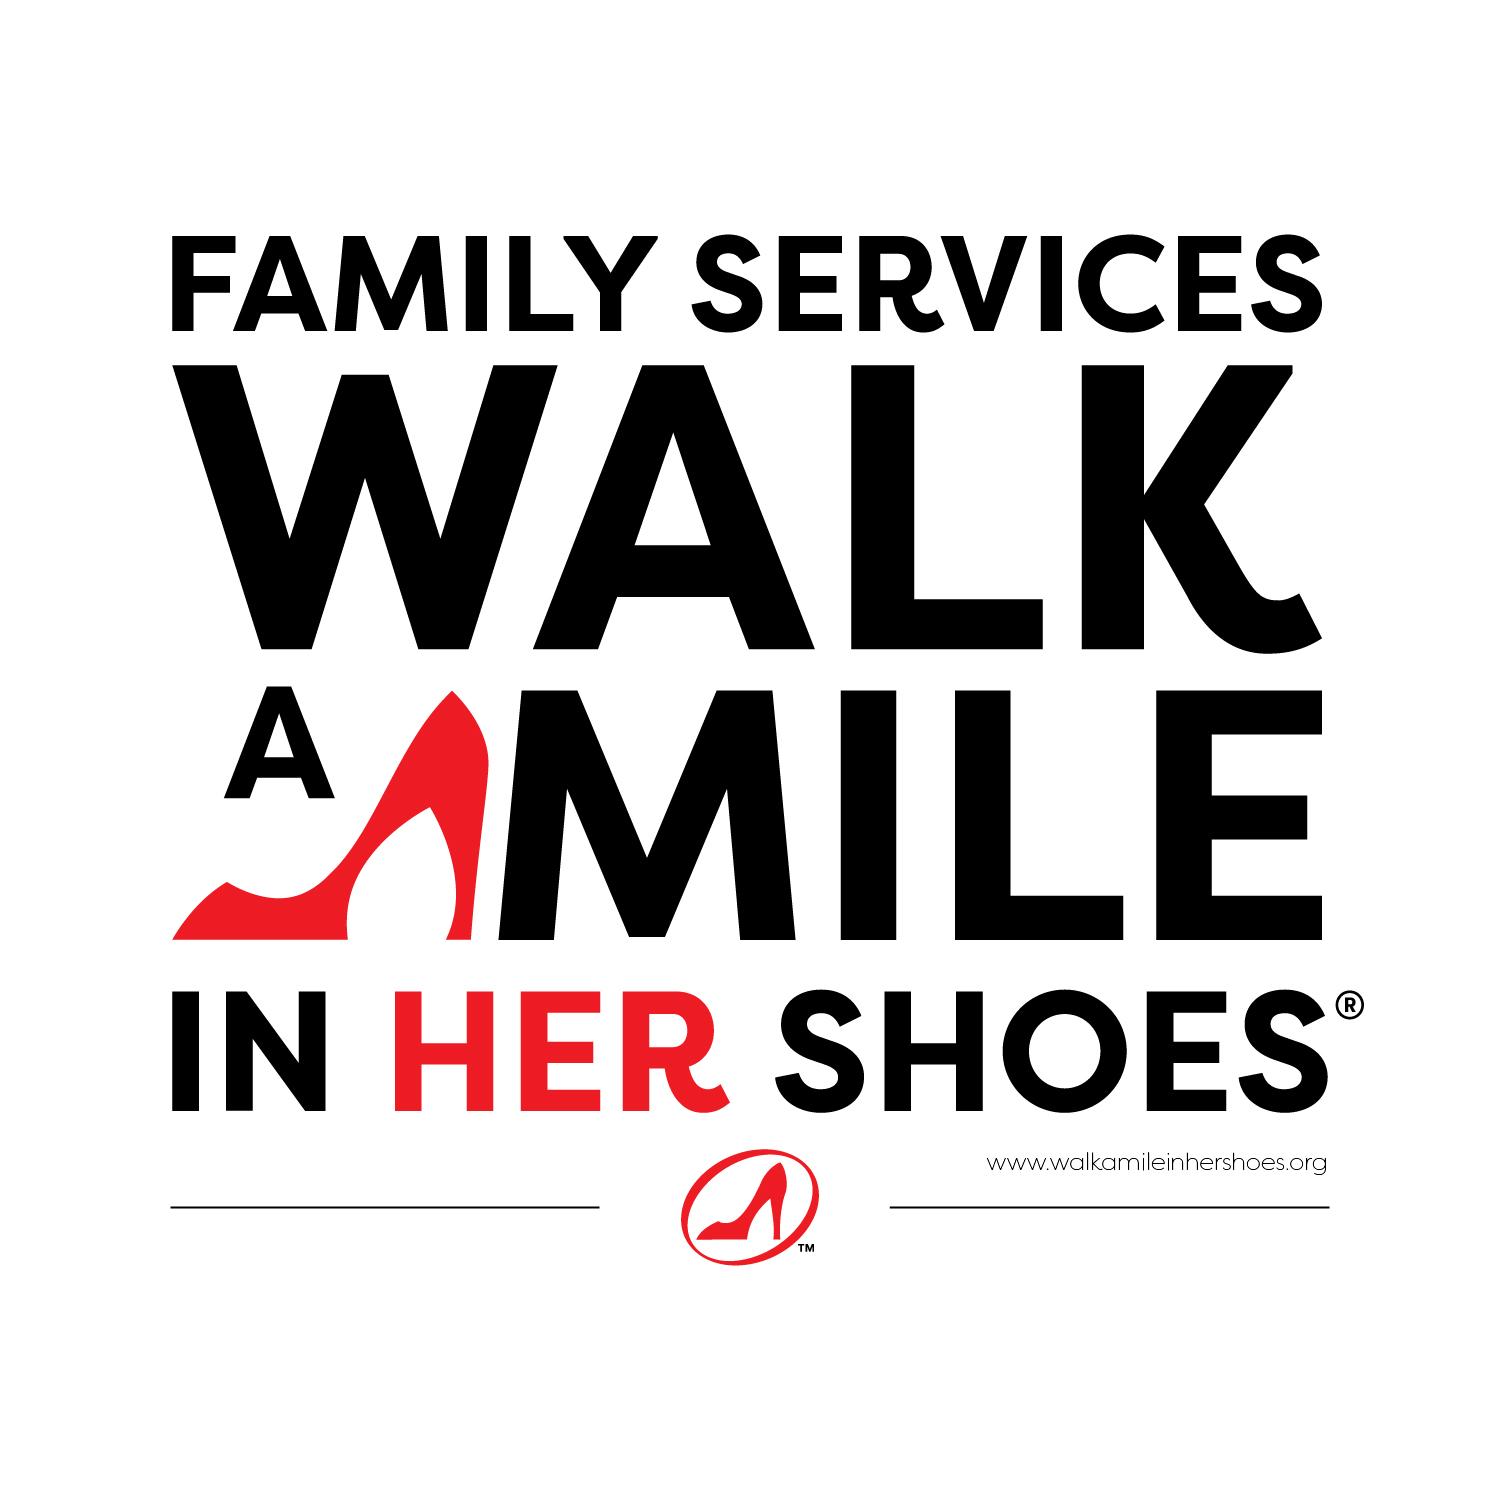 9th Annual Family Services Walk A Mile